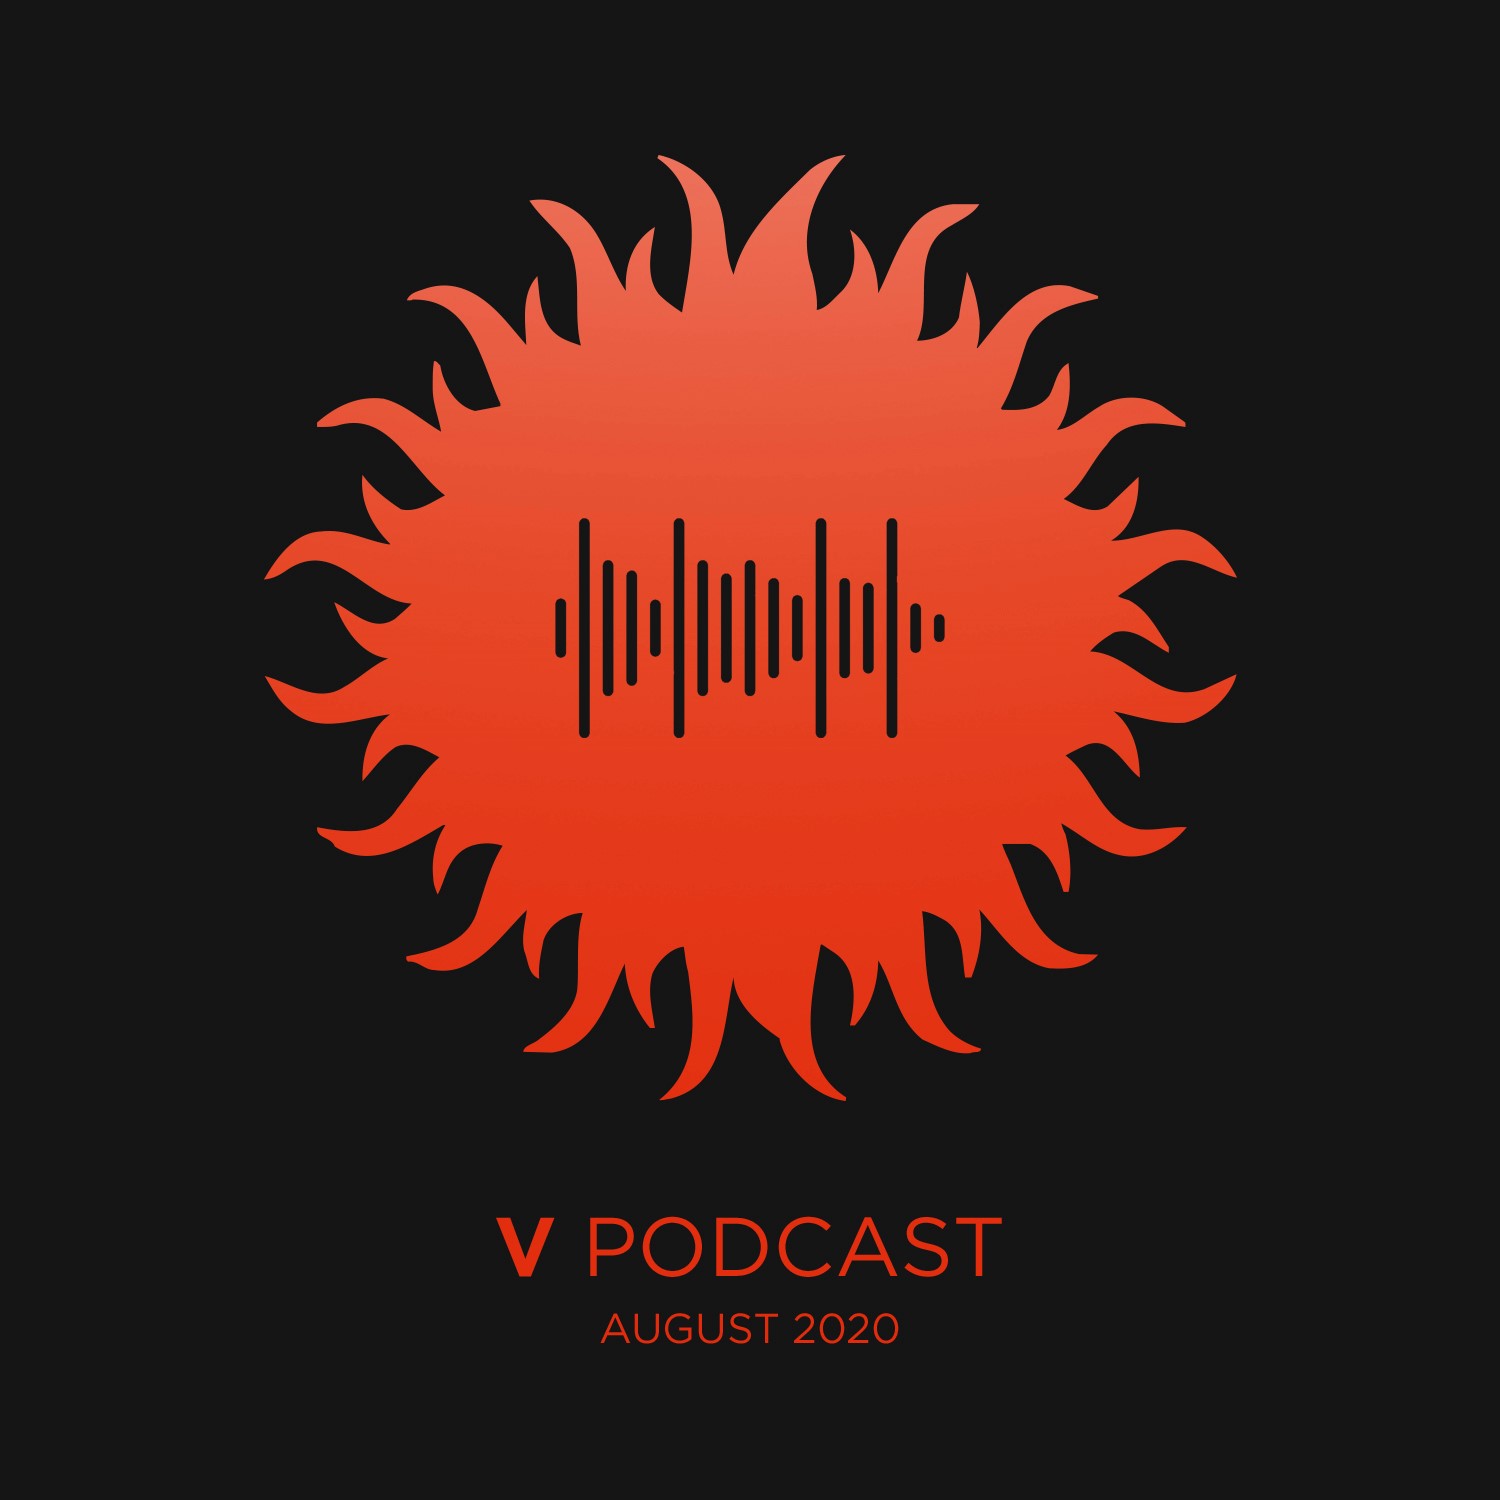 V Podcast 095 - Drum and Bass - Hosted by Bryan Gee Artwork